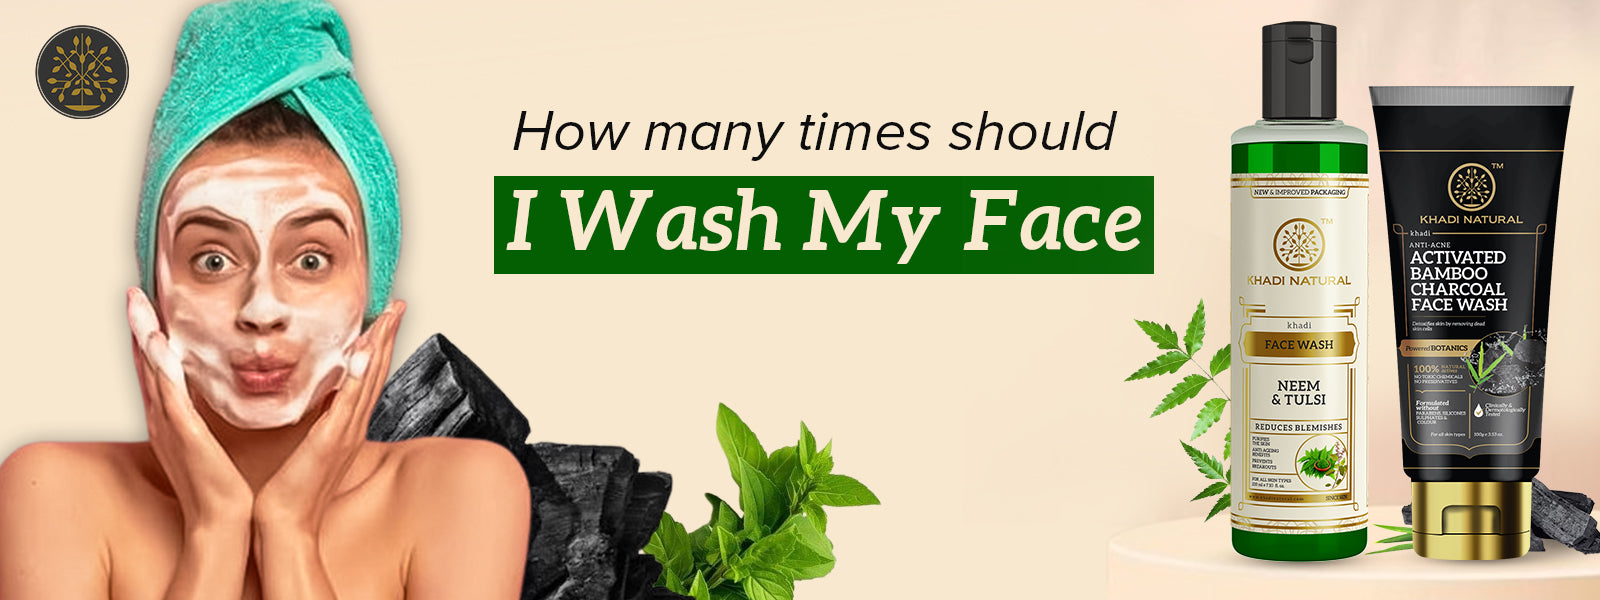 How many times should i wash my face